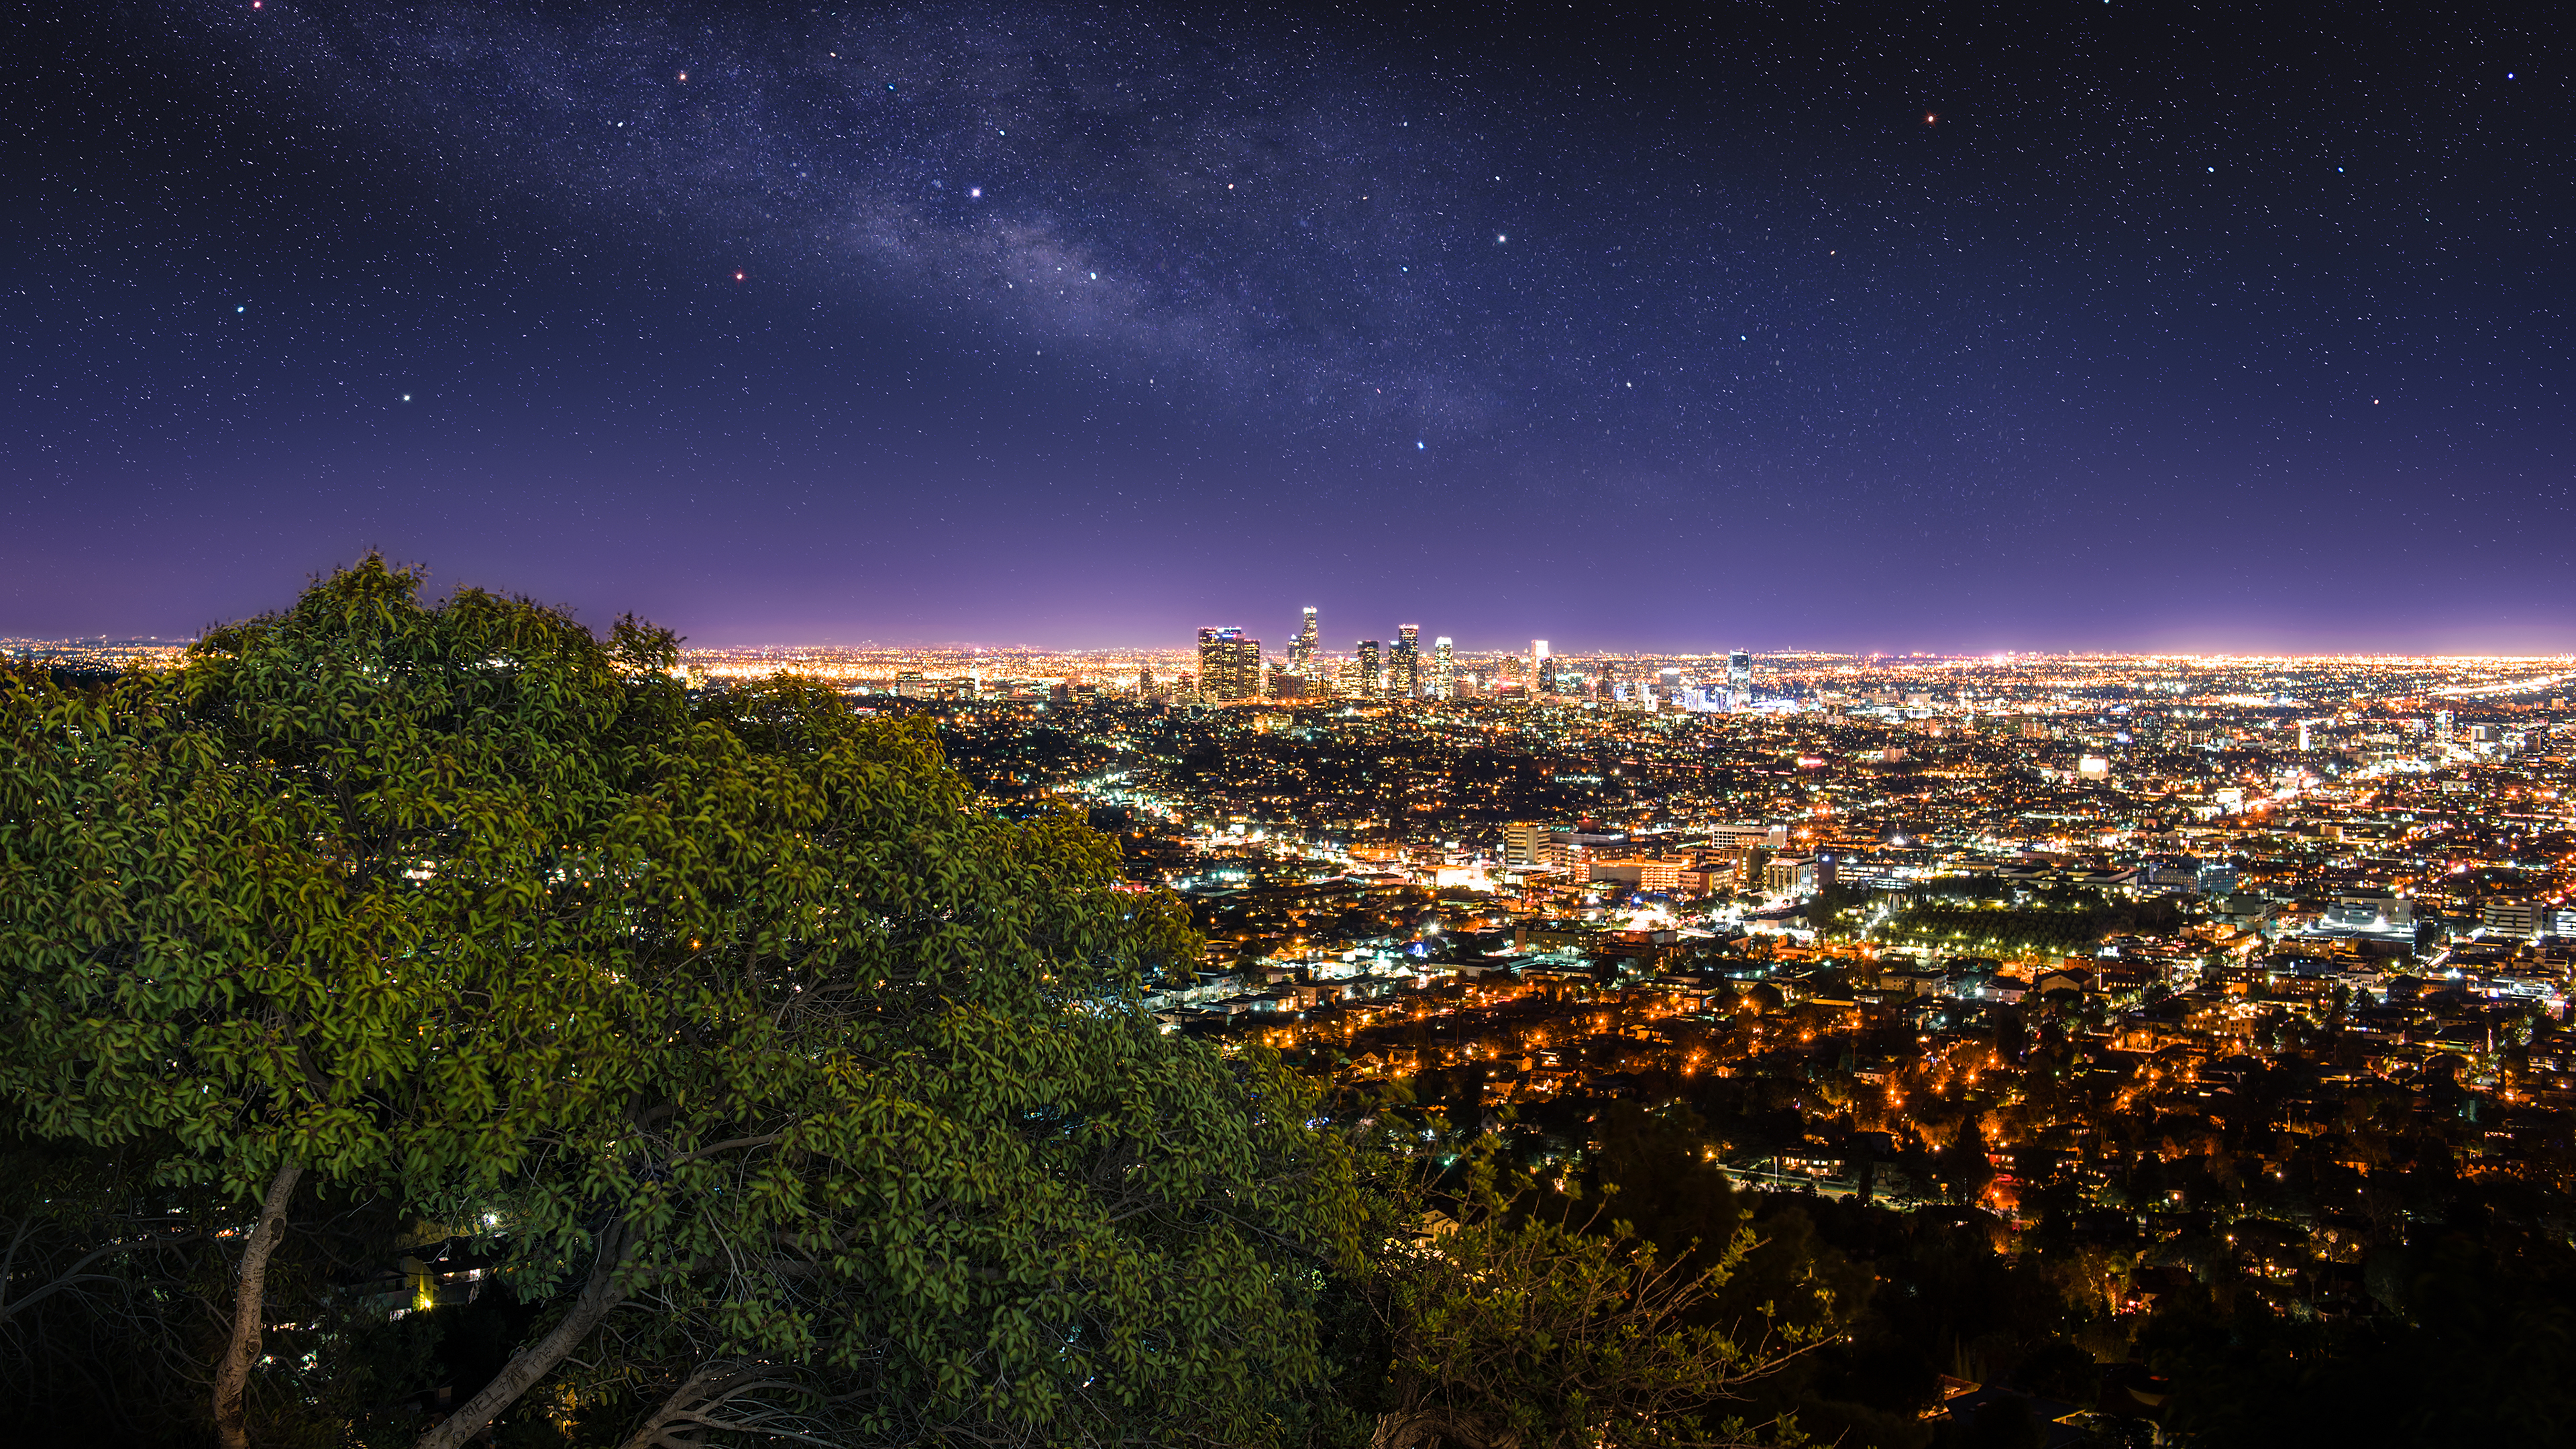 Starry night in Los Angeles, California